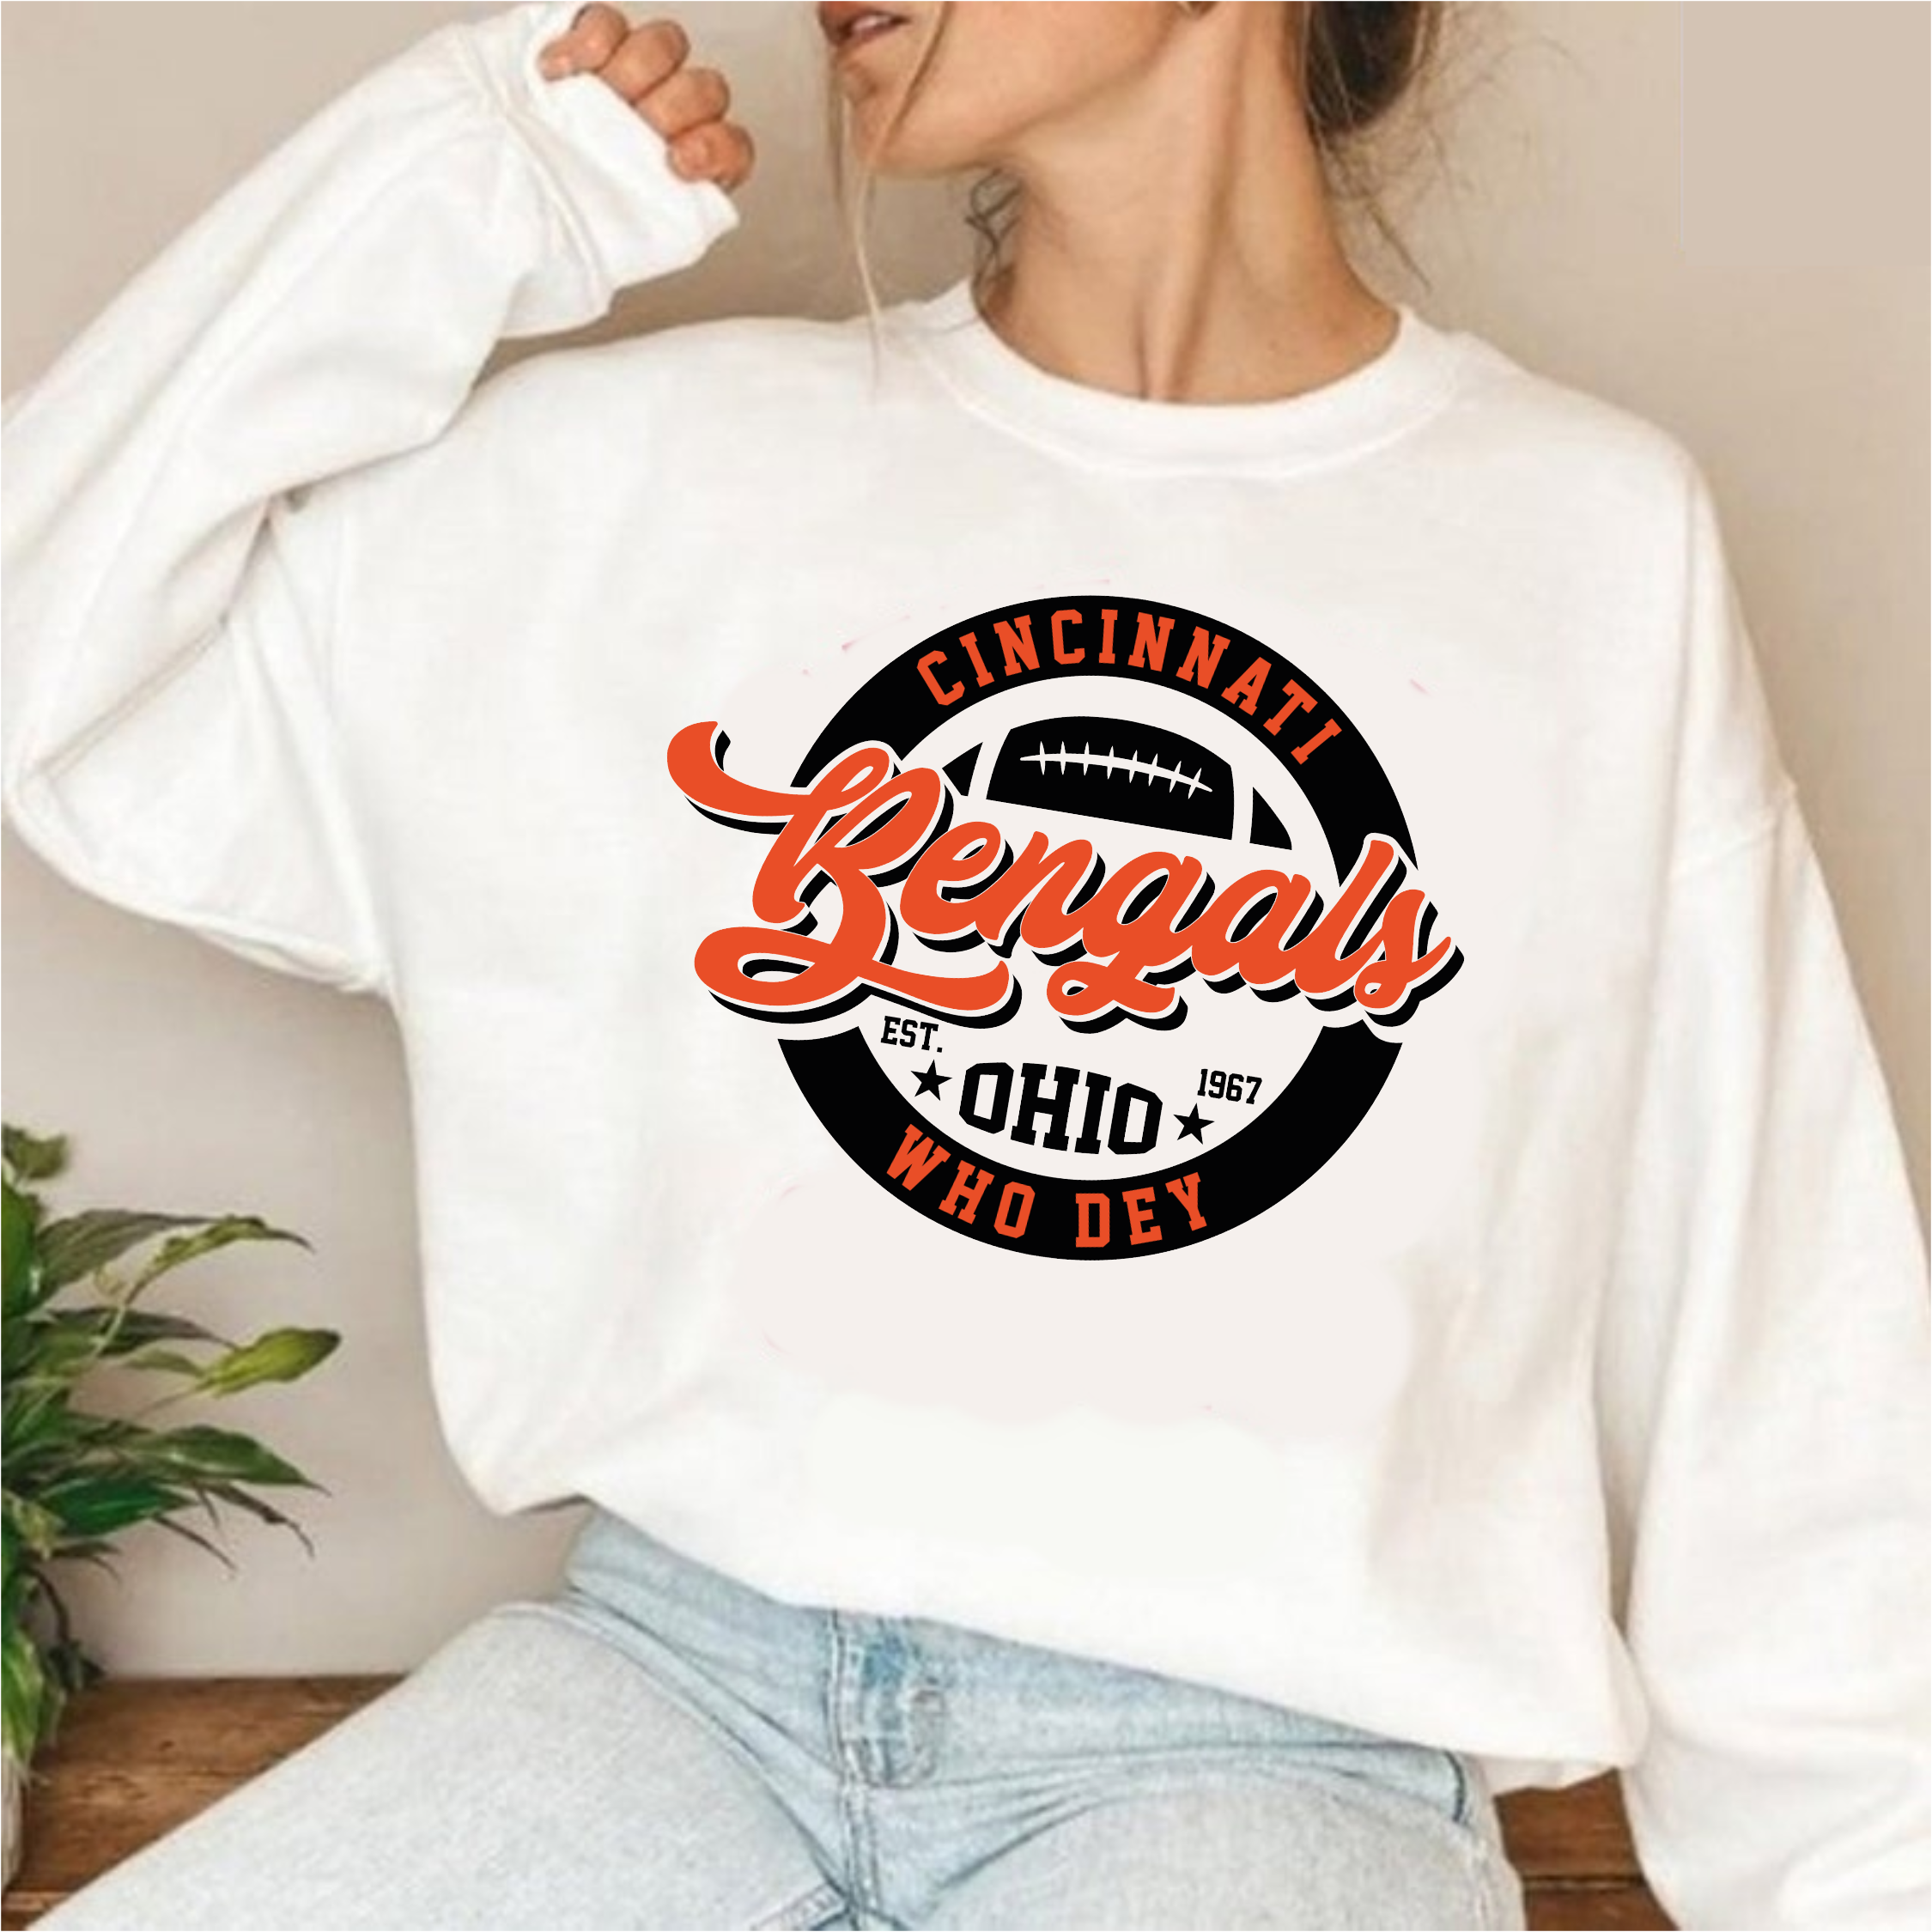 Cincinnati bengals they gotta play us who dey think gonna beat them bengals  no body shirt, hoodie, sweater, long sleeve and tank top